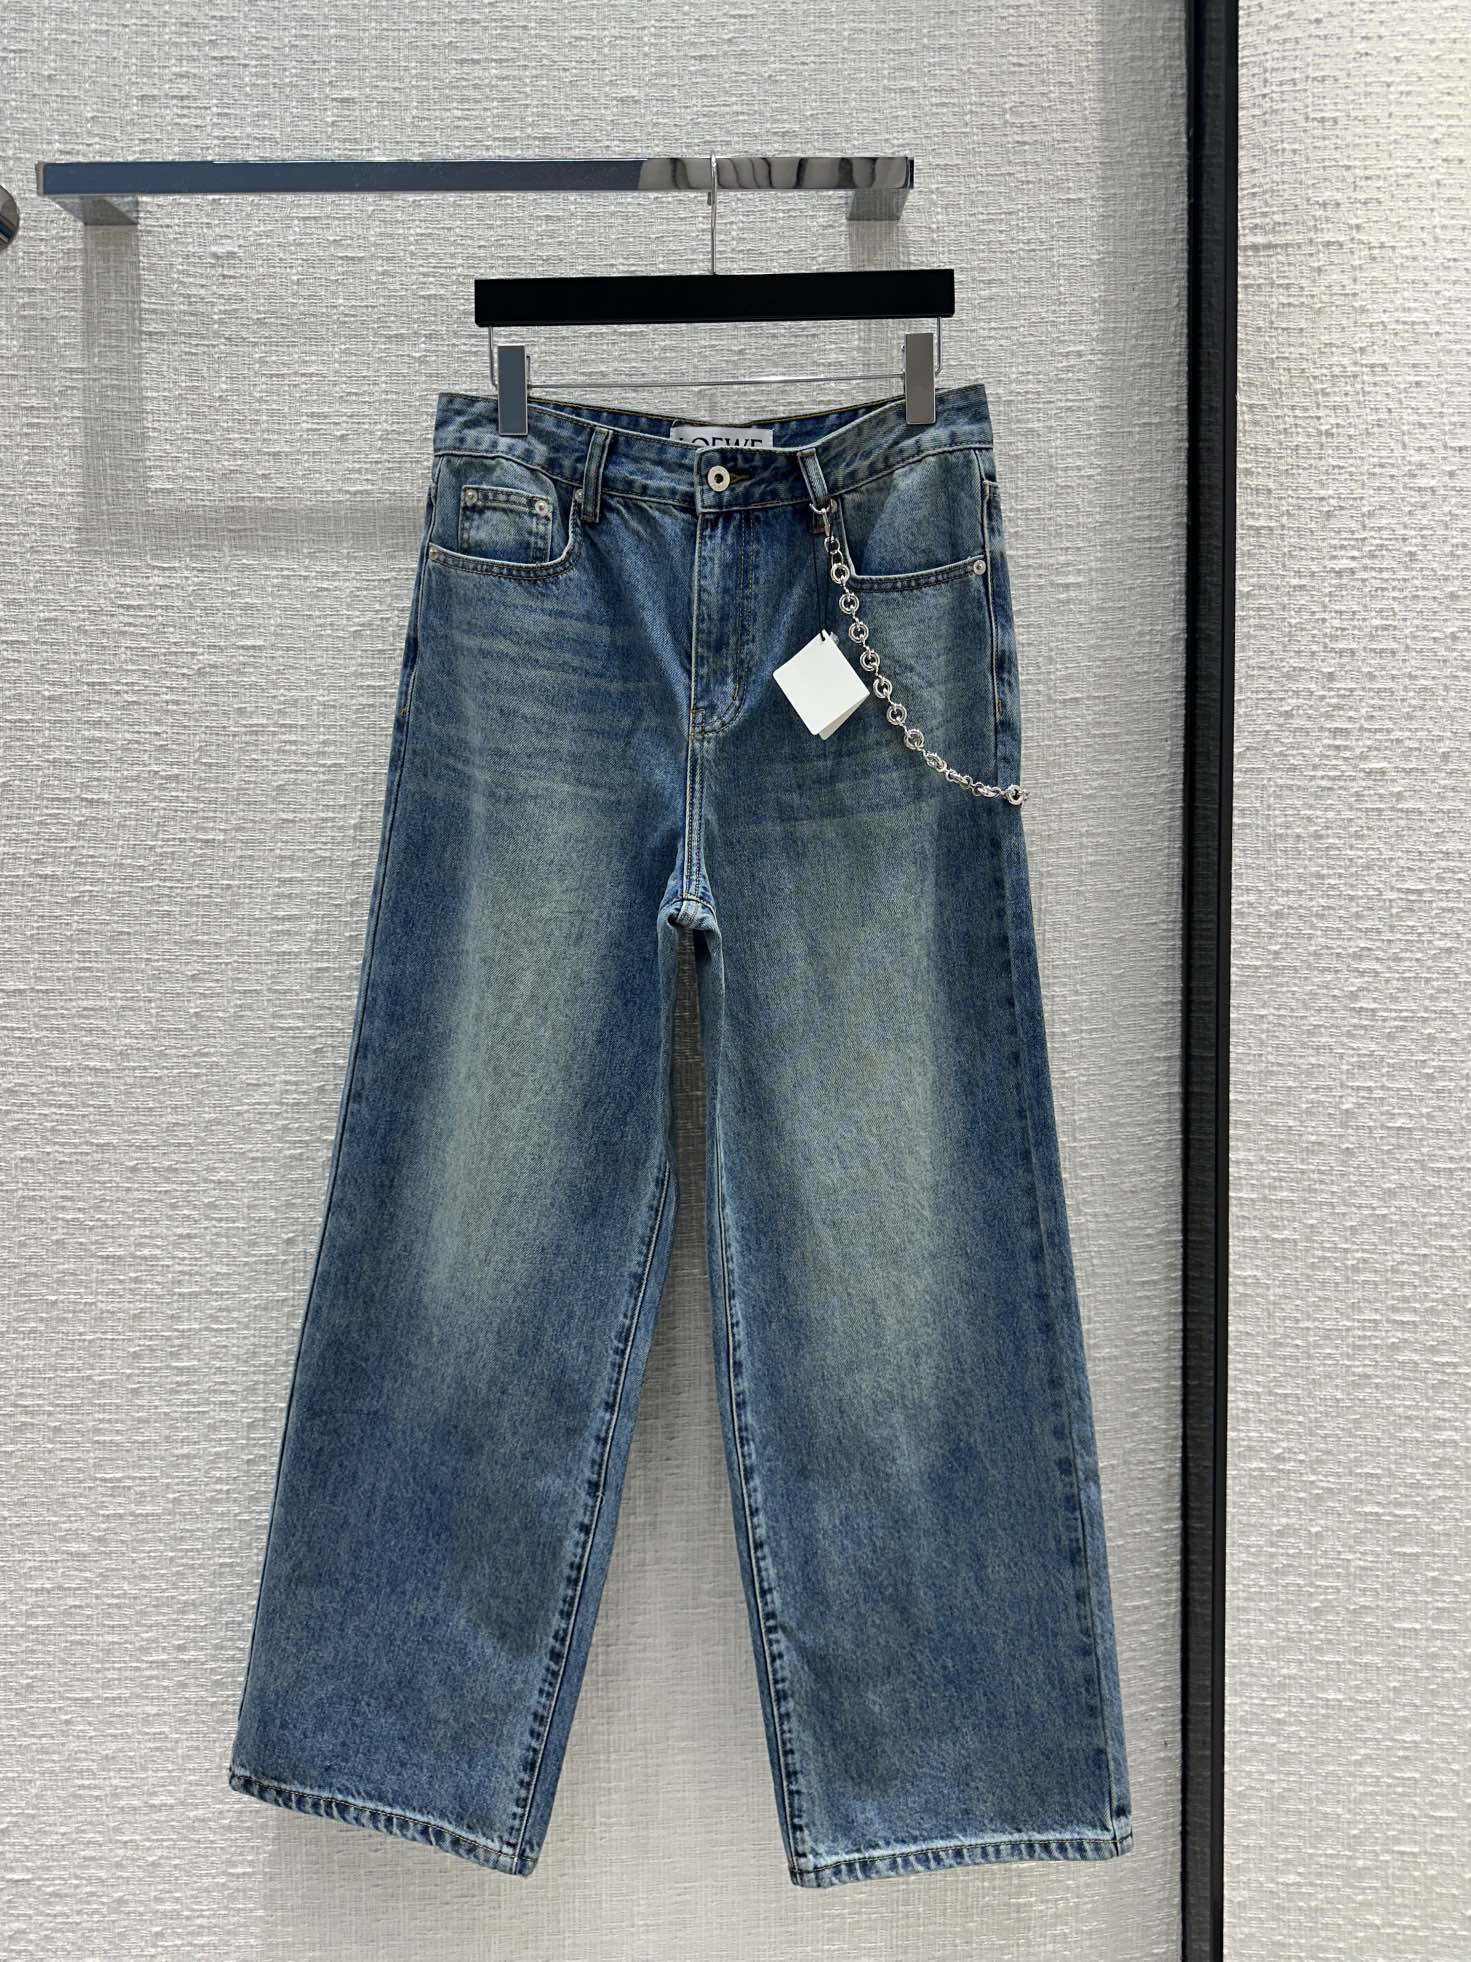 Loewe Clothing Jeans Denim Spring Collection Vintage Chains